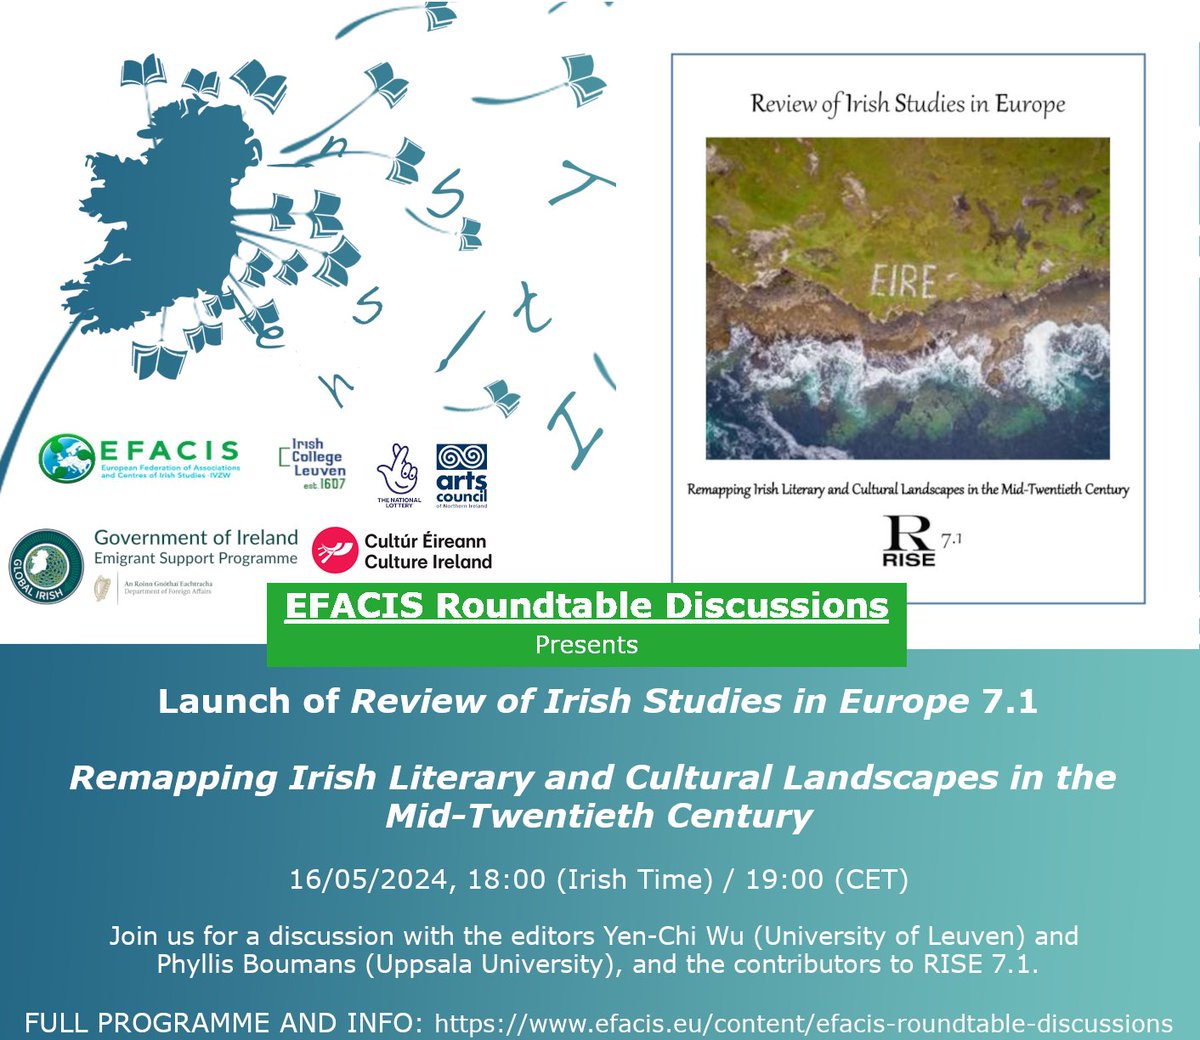 Join the editors and contributors this Thursday for the online #launch of RISE 7.1 Remapping Irish Literary and Cultural Landscapes in the Mid-Twentieth Century Full programme and registration link at efacis.eu/content/efacis… RISE 7.1 is now available at risejournal.eu/index.php/rise…